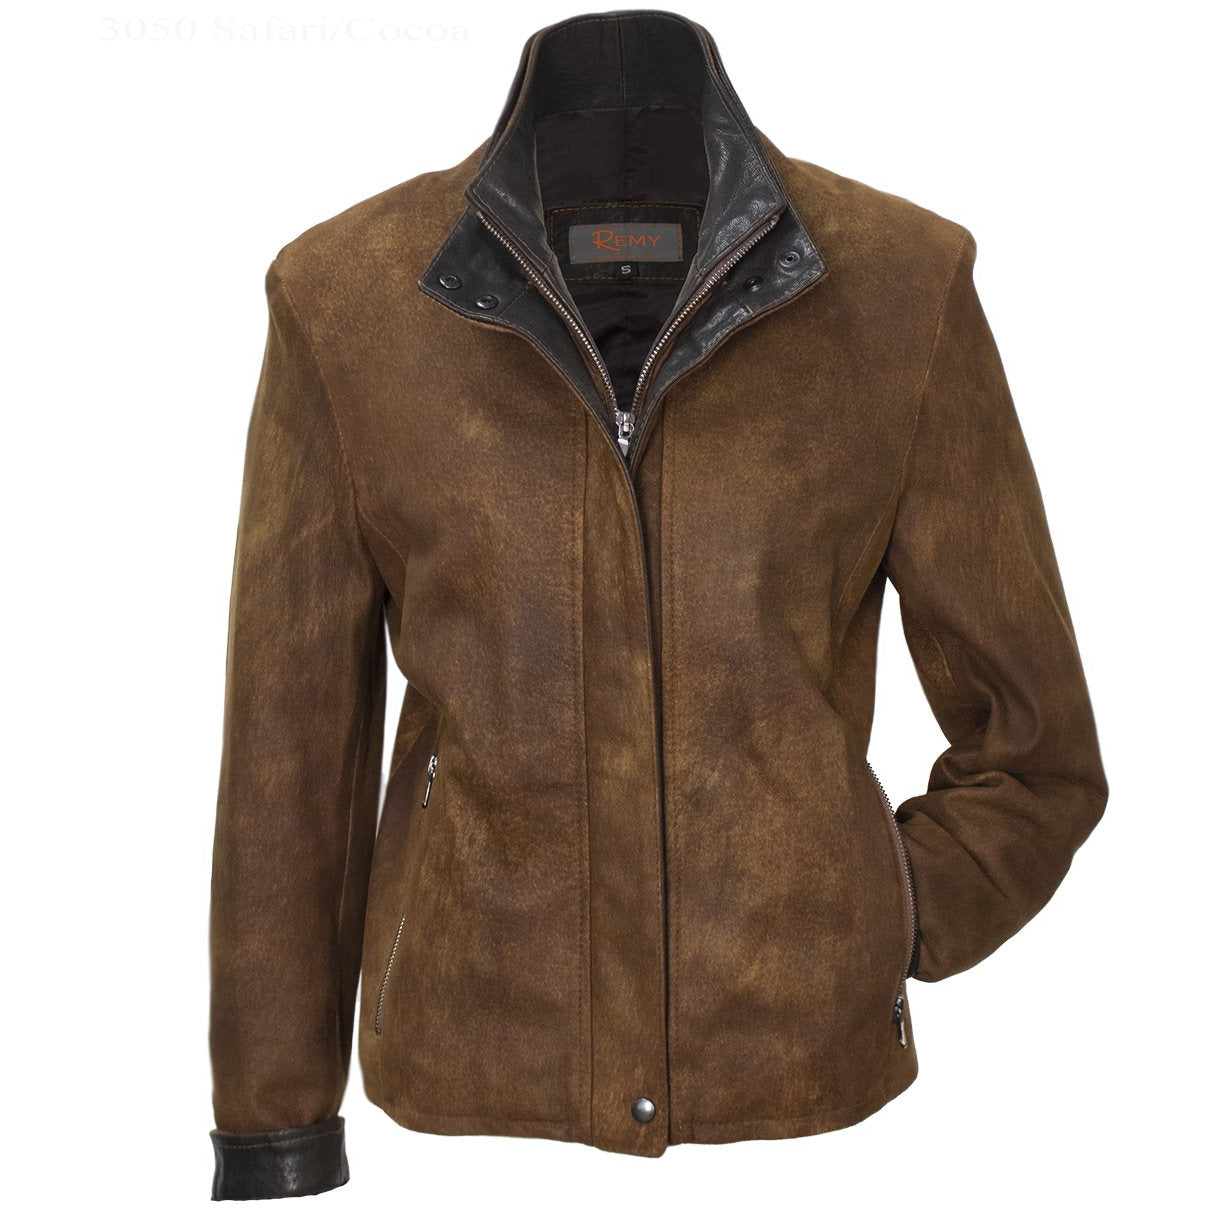 3050 - Ladies Double Jacket – Remy Collar Leather in Leather Safari/Cognac